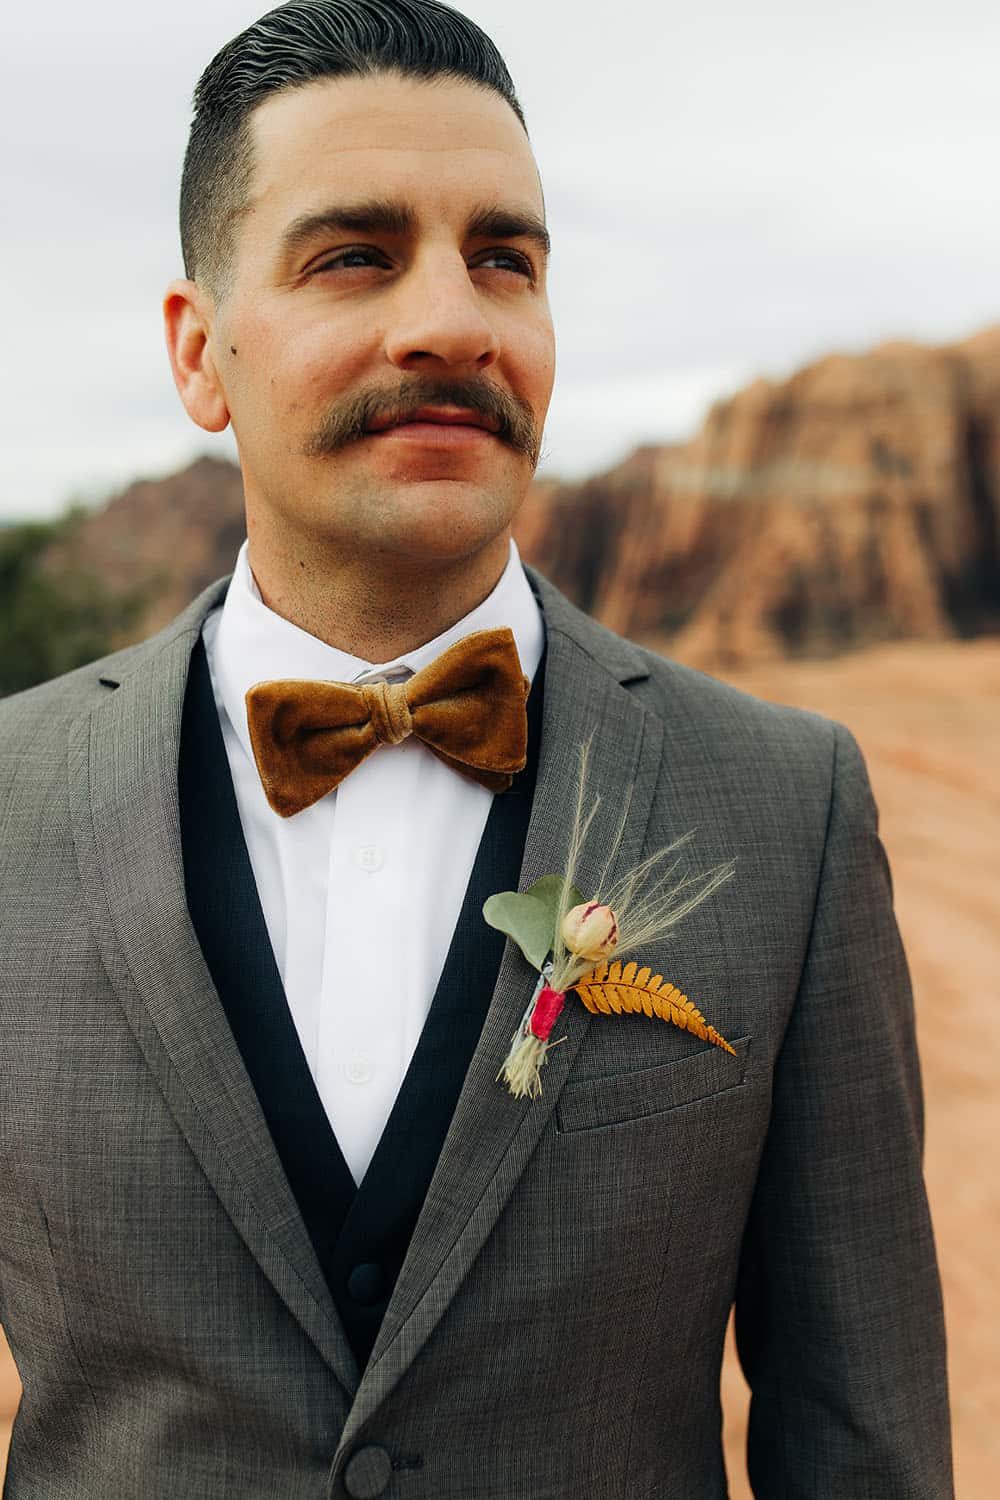 How to Rent Groom Accessories for Your Dashing December Wedding